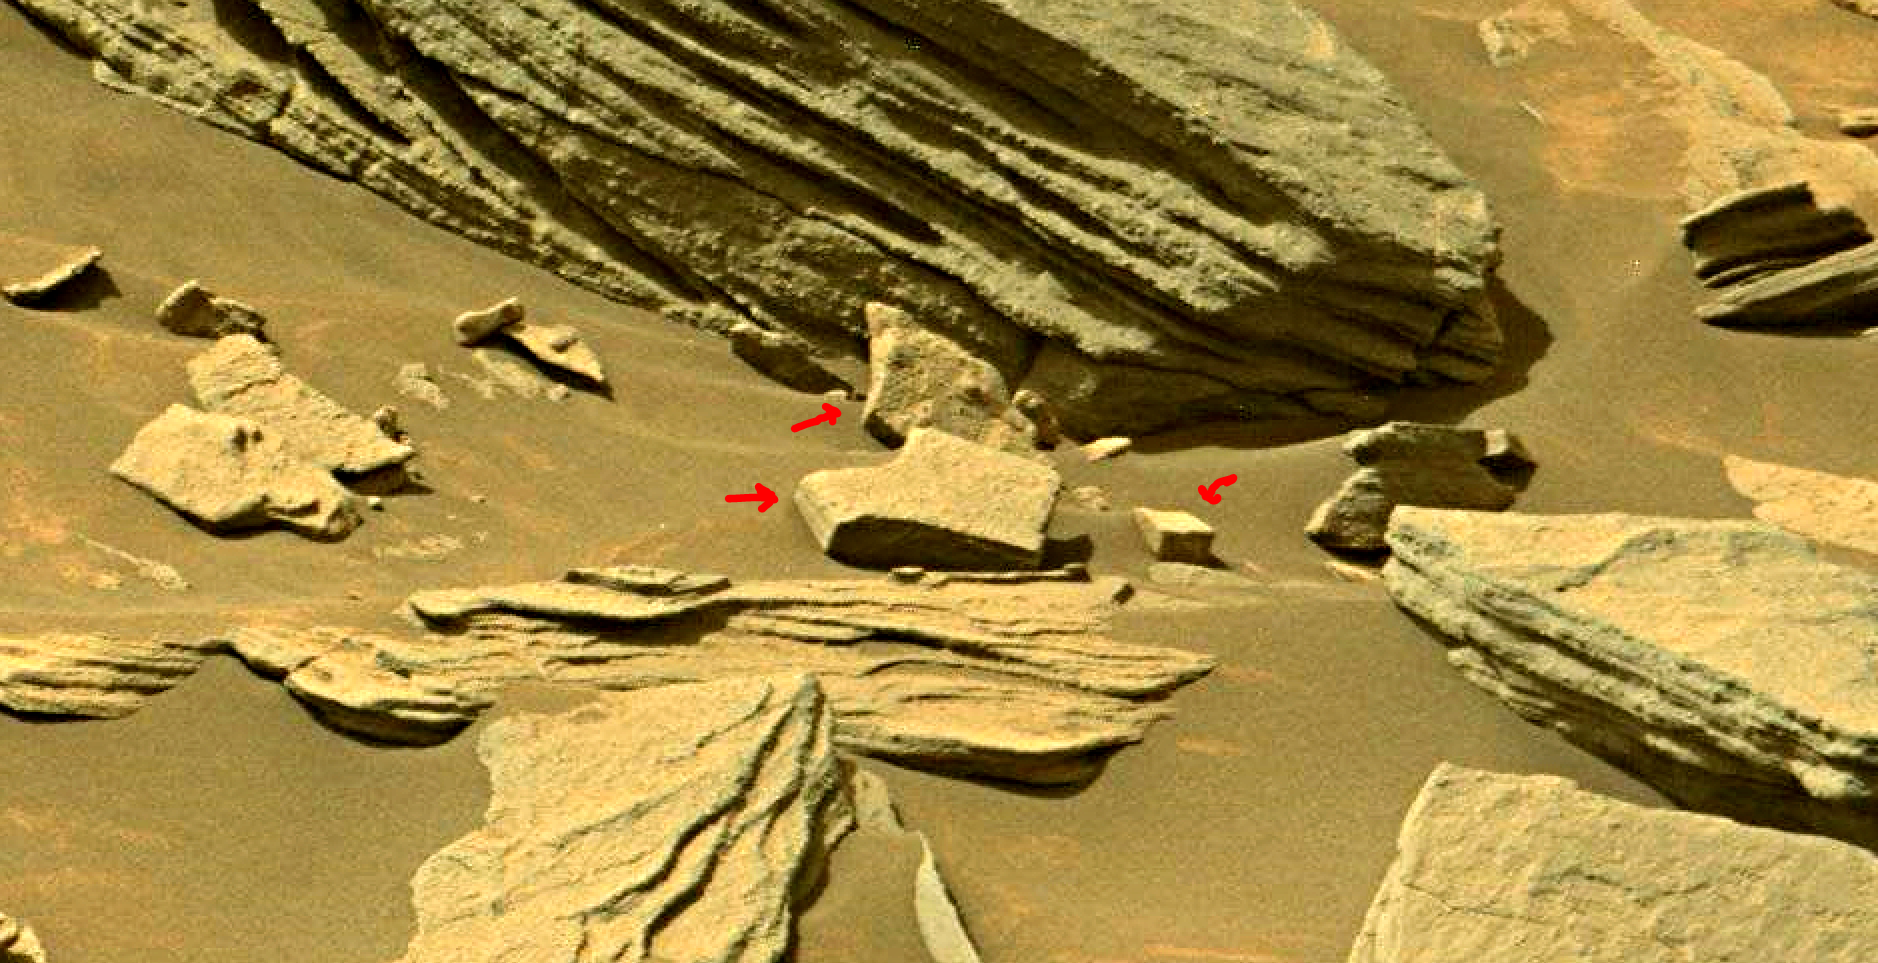 mars-sol-1467-anomaly-artifacts-4-was-life-on-mars